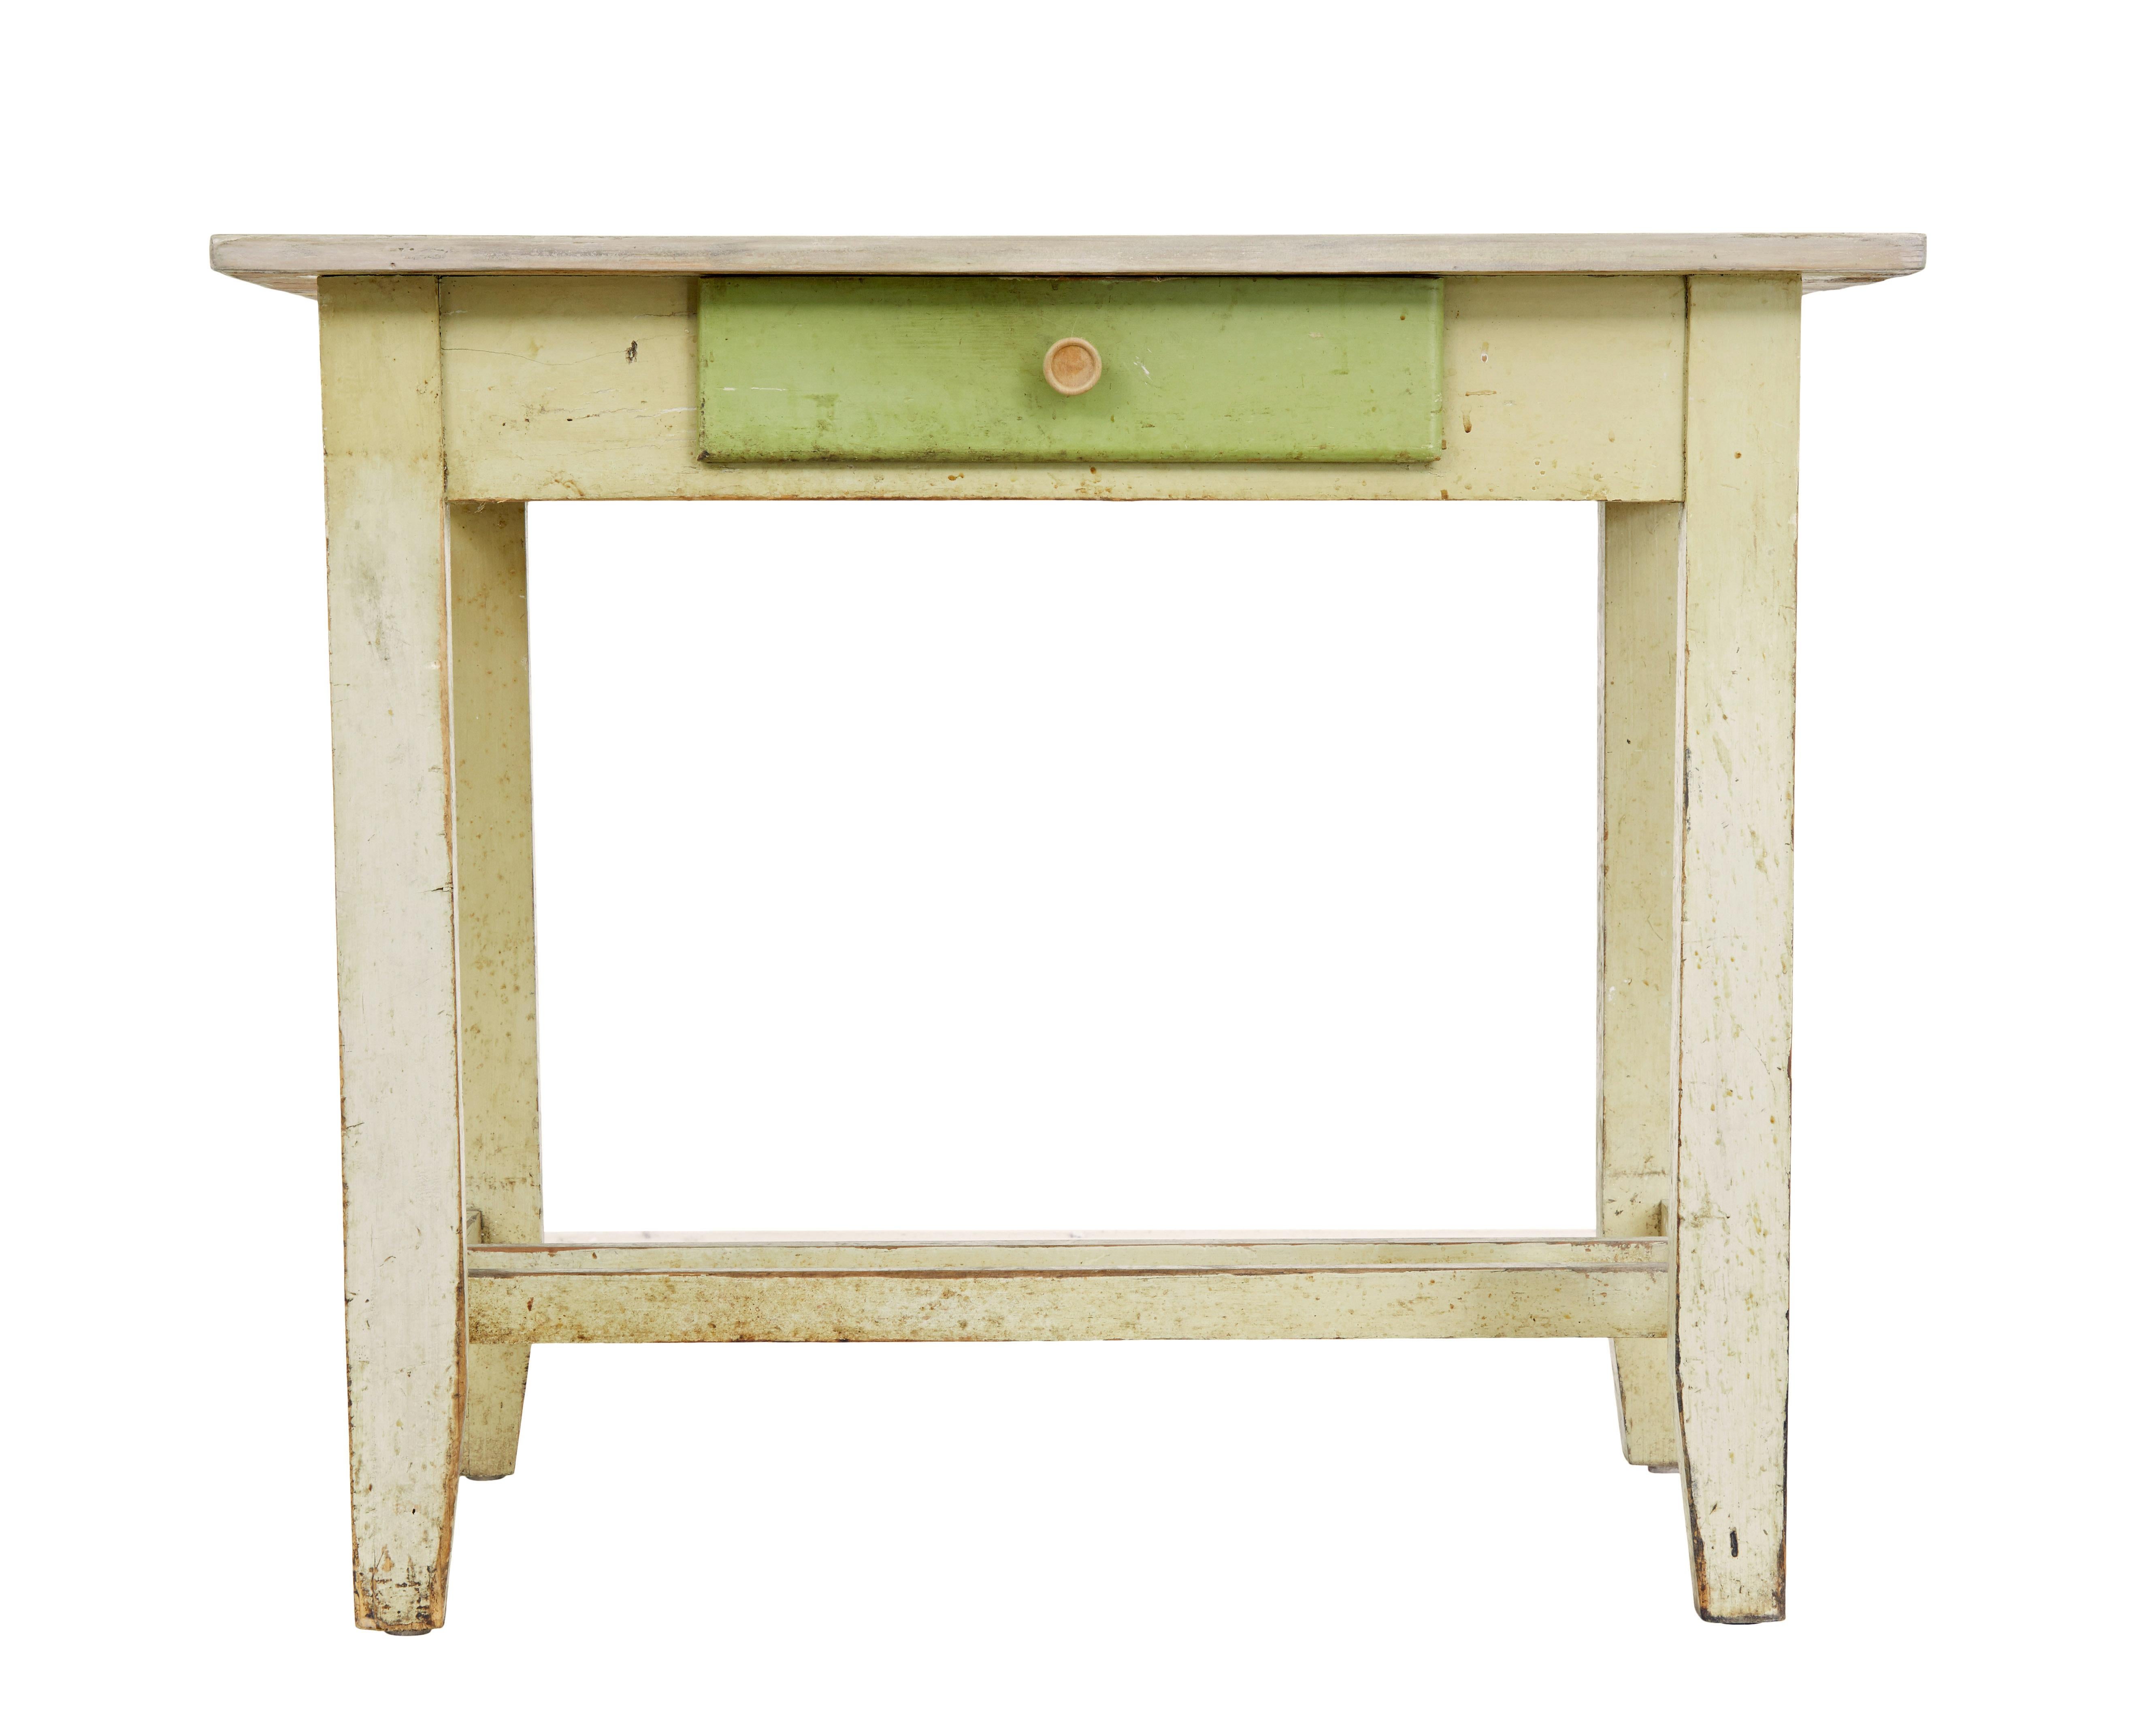 19th century green painted Scandinavian side table circa 1890.

Practical table for many use's around the home, would work well as a hallway table or even in the garden room.

Rectangular which has been later painted from the rest of the piece due